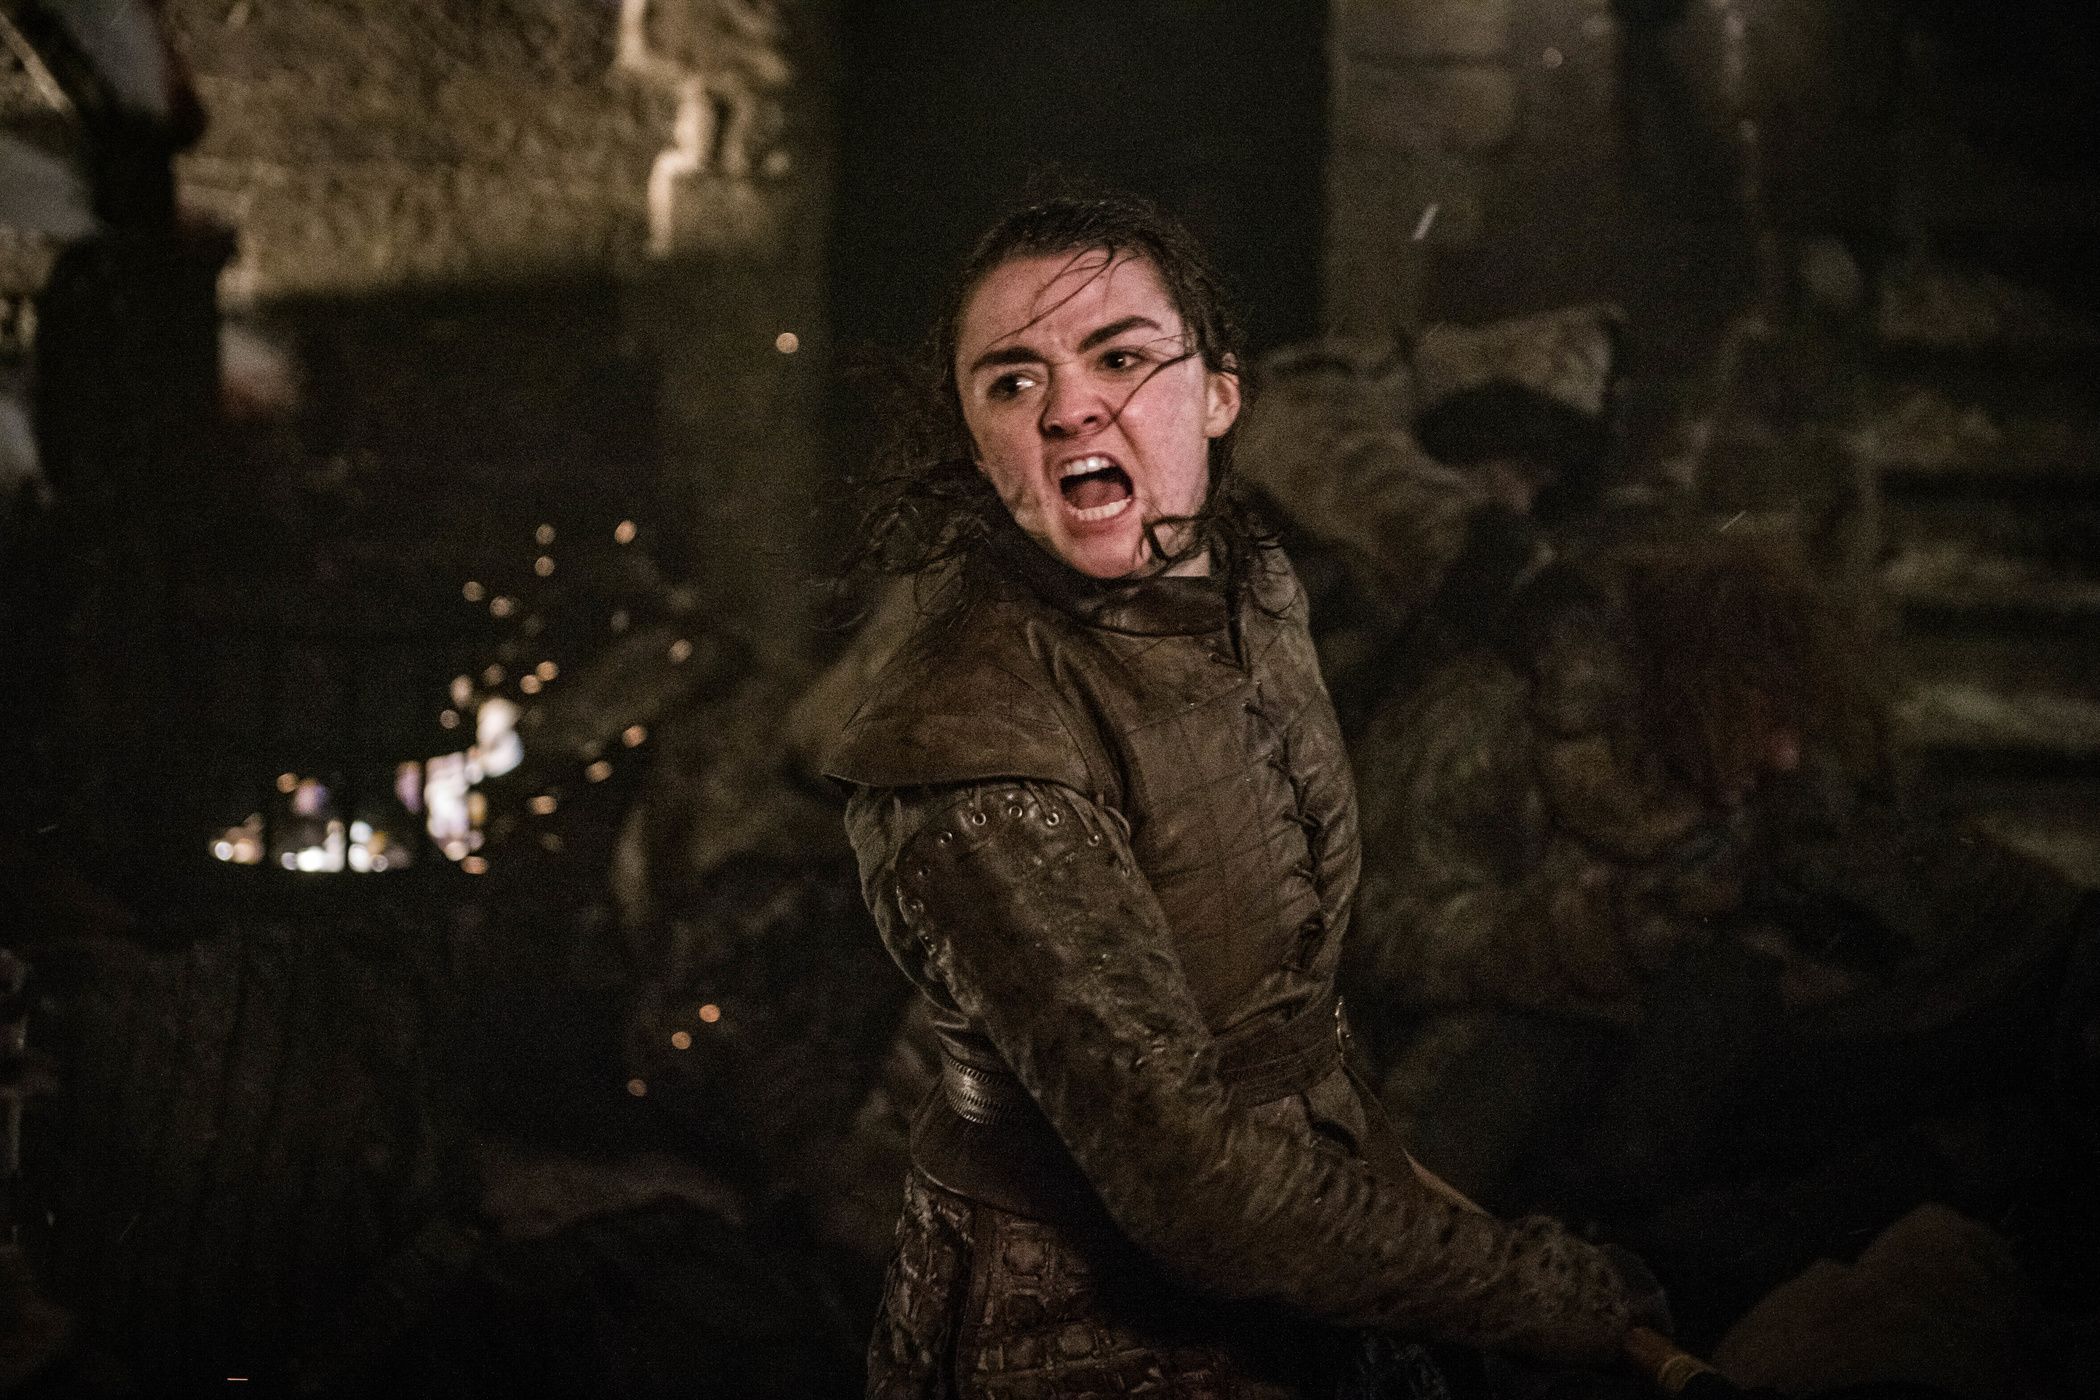 Why the Ending of 'Game of Thrones' May Not Align With the Books